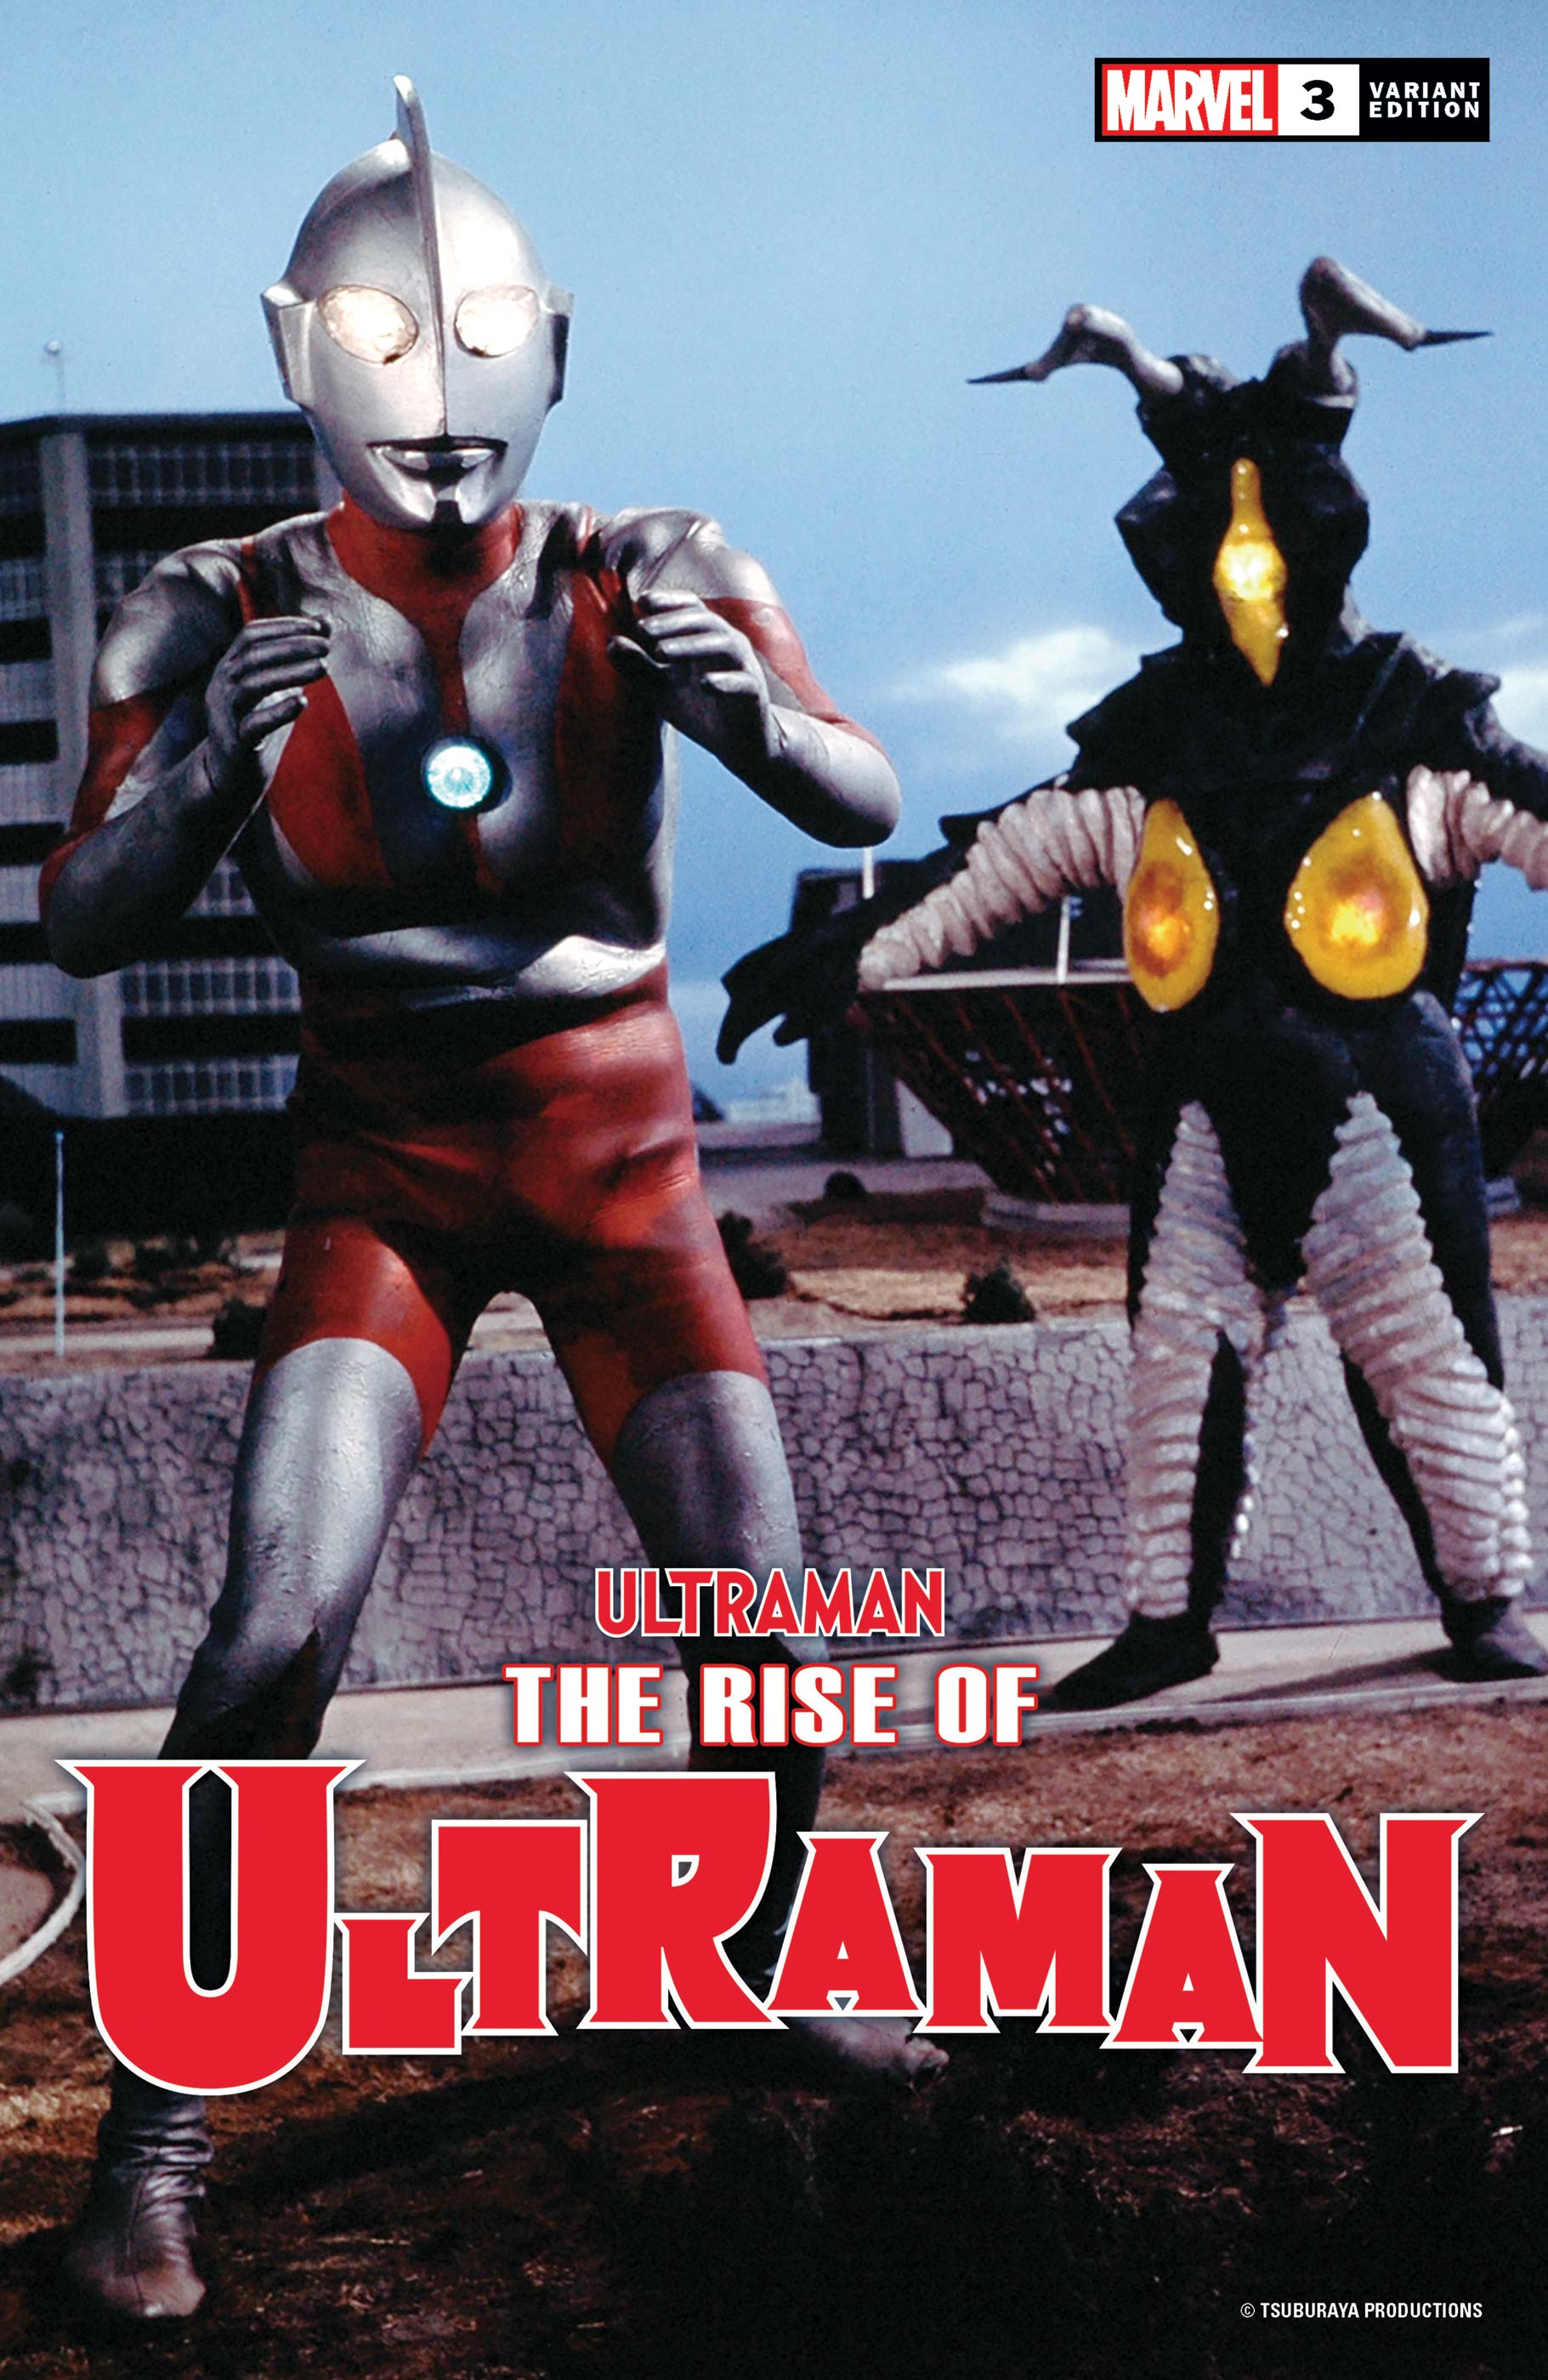 The Rise of Ultraman (2020) #3 (Variant)